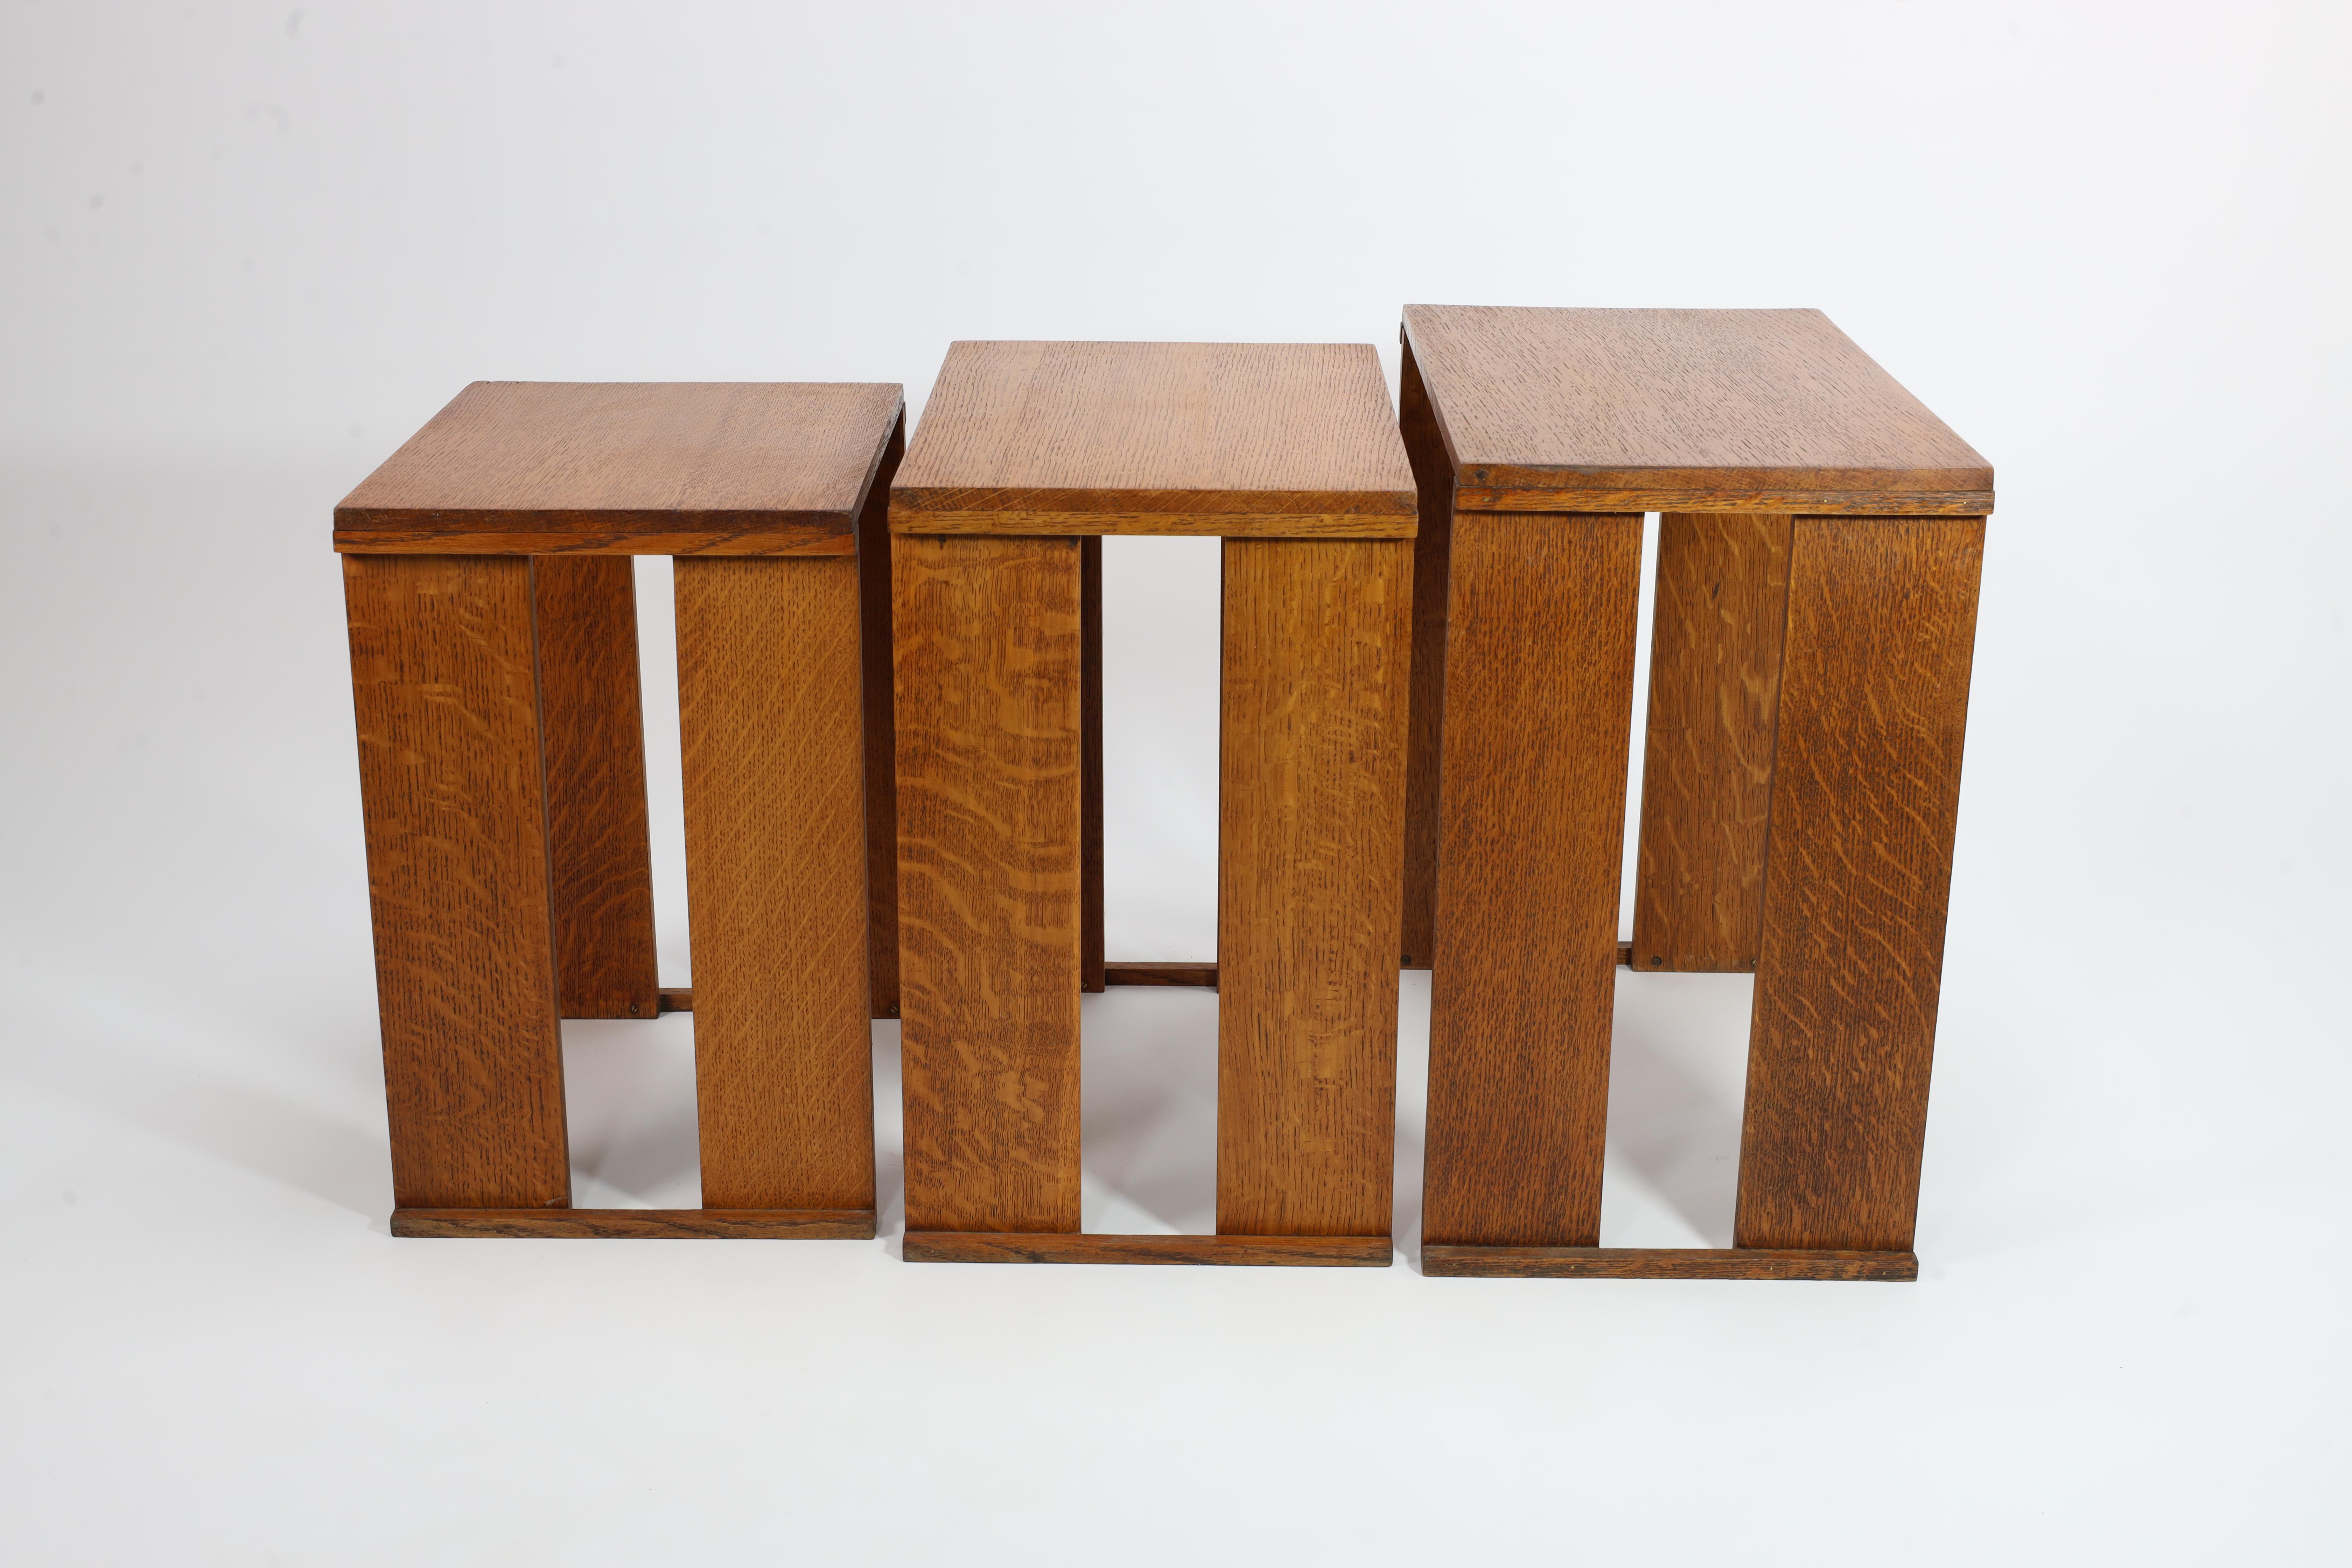 A nest of three Art Deco light oak side tables of planked construction.
Small - Height: 43.5 cm x Width: 34 cm x Depth: 27.5 cm
Medium - Height: 45.5 cm x Width: 40 cm x Depth: 27.5 cm
Large - Height: 47 cm x Width: 46 cm x Depth: 27.5 cm